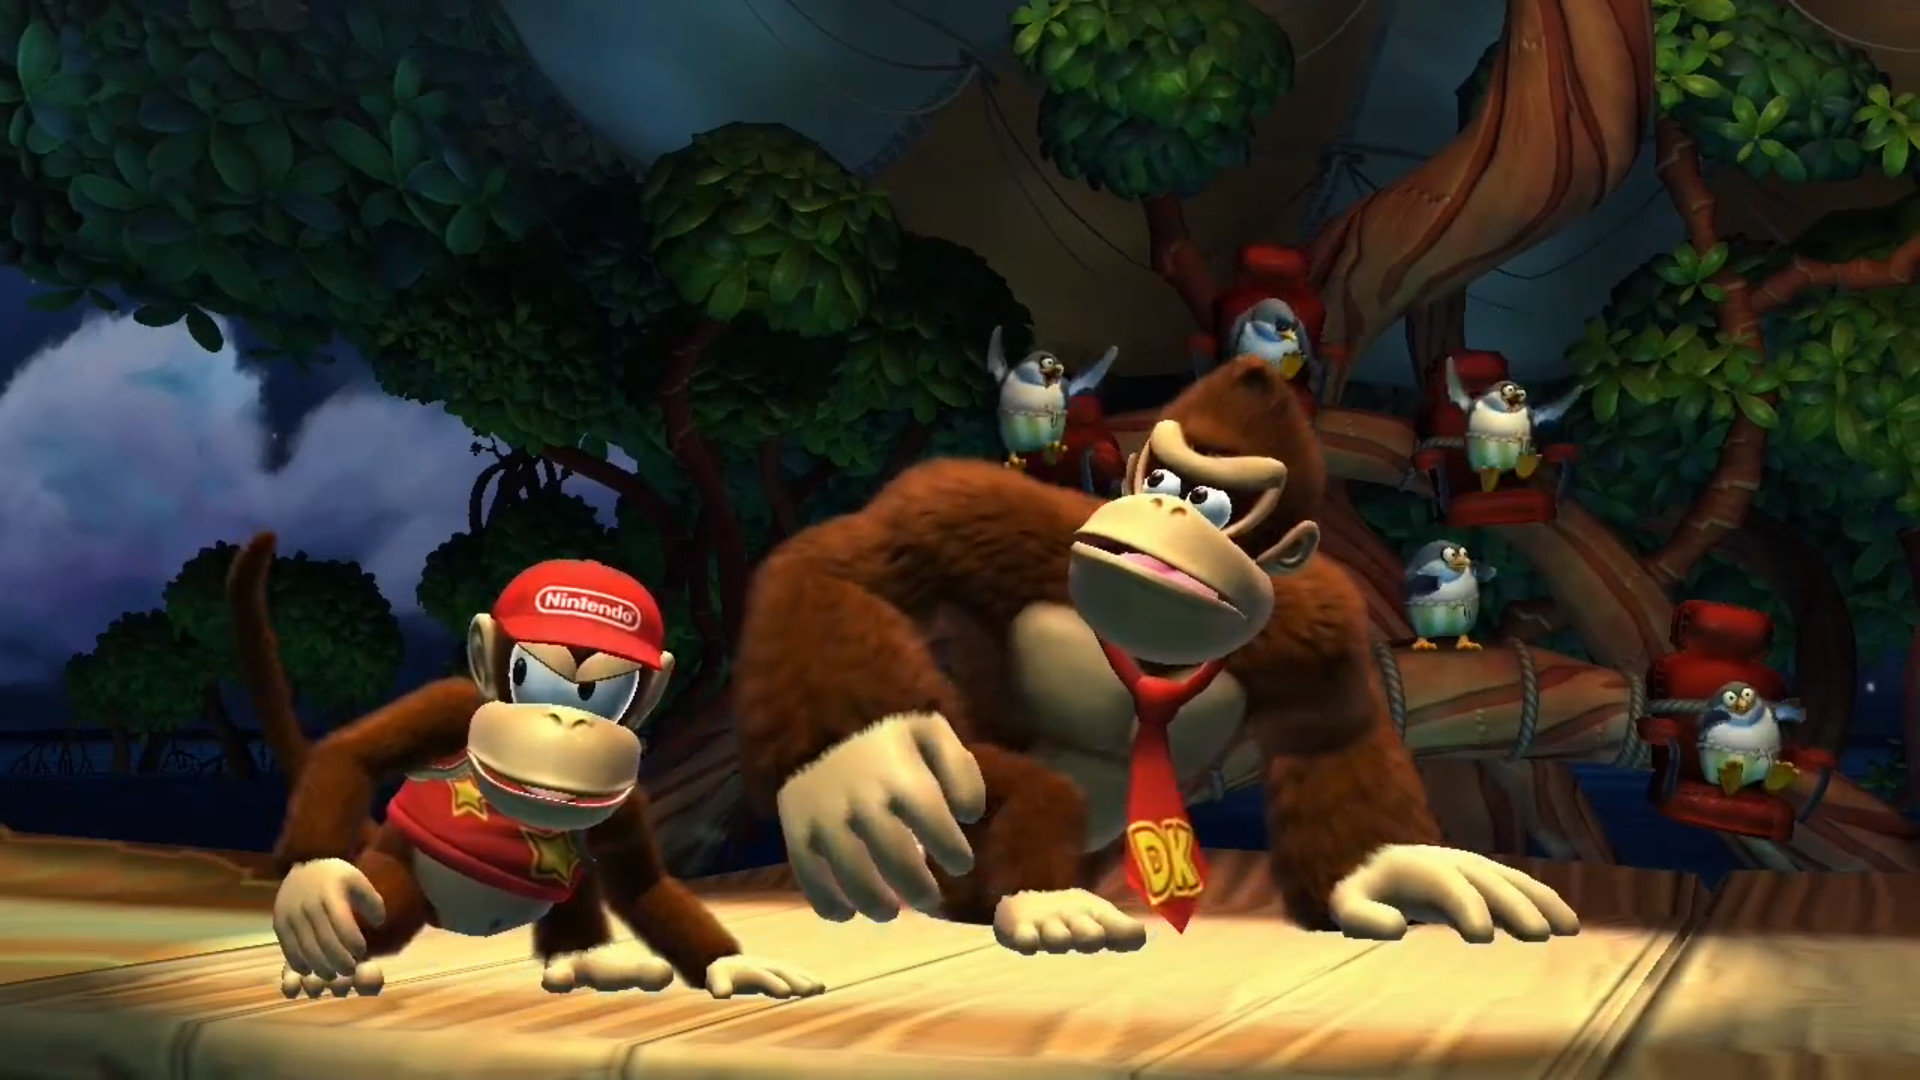 Download 1080p Donkey Kong Country: Tropical Freeze desktop background ID:250552 for free